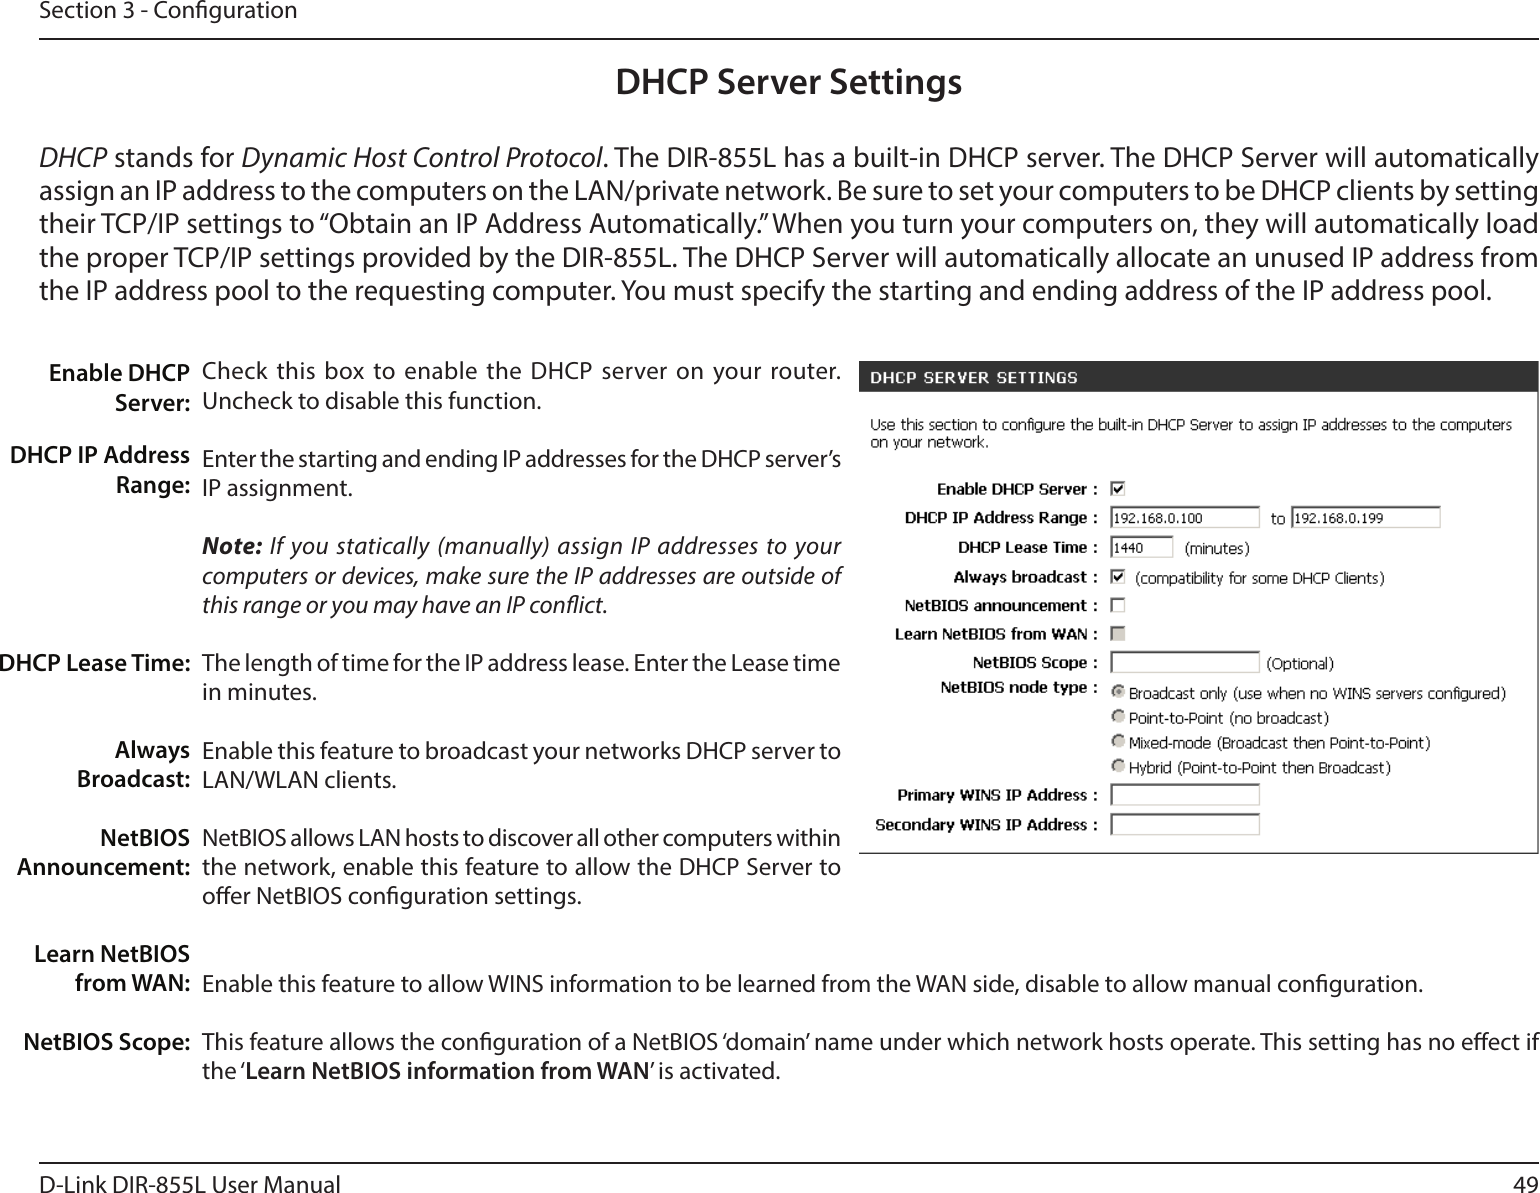 49D-Link DIR-855L User ManualSection 3 - CongurationDHCP Server SettingsDHCP stands for Dynamic Host Control Protocol. The DIR-855L has a built-in DHCP server. The DHCP Server will automatically assign an IP address to the computers on the LAN/private network. Be sure to set your computers to be DHCP clients by setting their TCP/IP settings to “Obtain an IP Address Automatically.” When you turn your computers on, they will automatically load the proper TCP/IP settings provided by the DIR-855L. The DHCP Server will automatically allocate an unused IP address from the IP address pool to the requesting computer. You must specify the starting and ending address of the IP address pool.Check this box to enable the DHCP server on your router. Uncheck to disable this function.Enter the starting and ending IP addresses for the DHCP server’s IP assignment.Note: If you statically (manually) assign IP addresses to your computers or devices, make sure the IP addresses are outside of this range or you may have an IP conict. The length of time for the IP address lease. Enter the Lease time in minutes.Enable this feature to broadcast your networks DHCP server to LAN/WLAN clients.NetBIOS allows LAN hosts to discover all other computers within the network, enable this feature to allow the DHCP Server to oer NetBIOS conguration settings.Enable this feature to allow WINS information to be learned from the WAN side, disable to allow manual conguration.This feature allows the conguration of a NetBIOS ‘domain’ name under which network hosts operate. This setting has no eect if the ‘Learn NetBIOS information from WAN’ is activated.Enable DHCP Server:DHCP IP Address Range:DHCP Lease Time:Always Broadcast:NetBIOS Announcement:Learn NetBIOS from WAN:NetBIOS Scope: